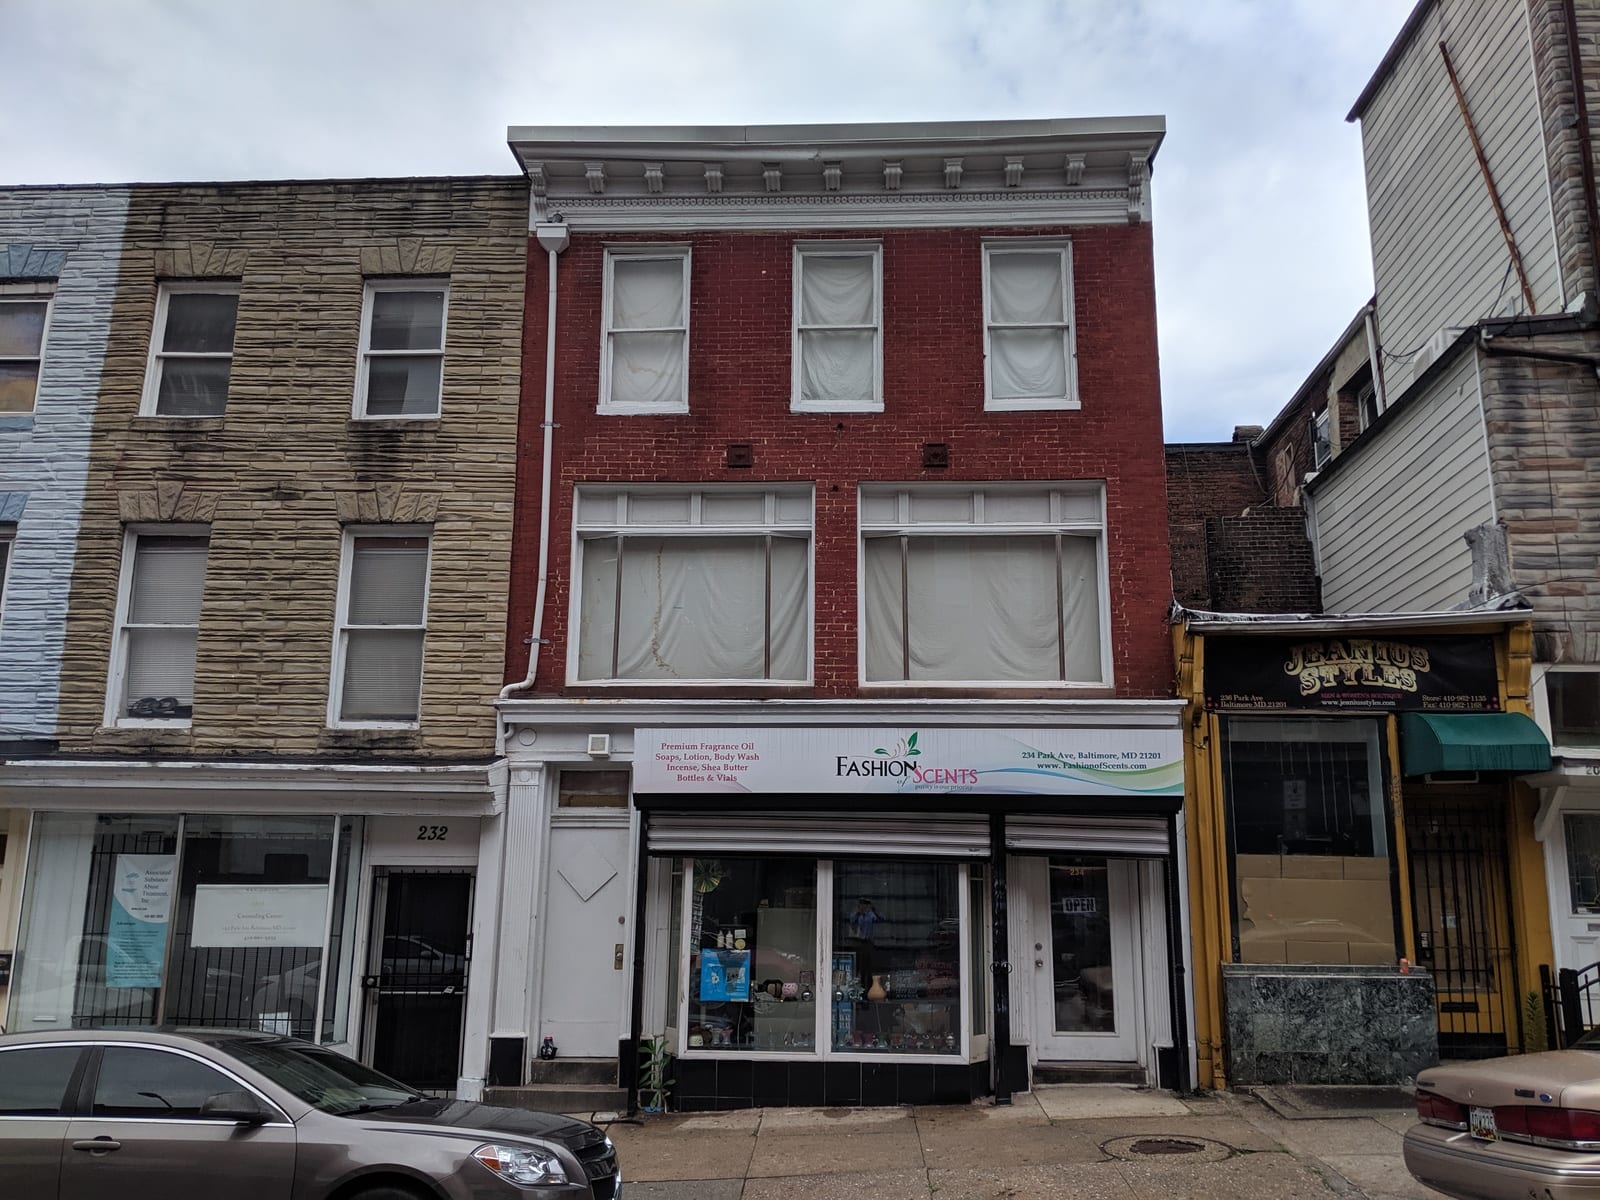 234 Park Ave:  Retail Store plus Value-Add Opportunity to Renovate Upper Floors